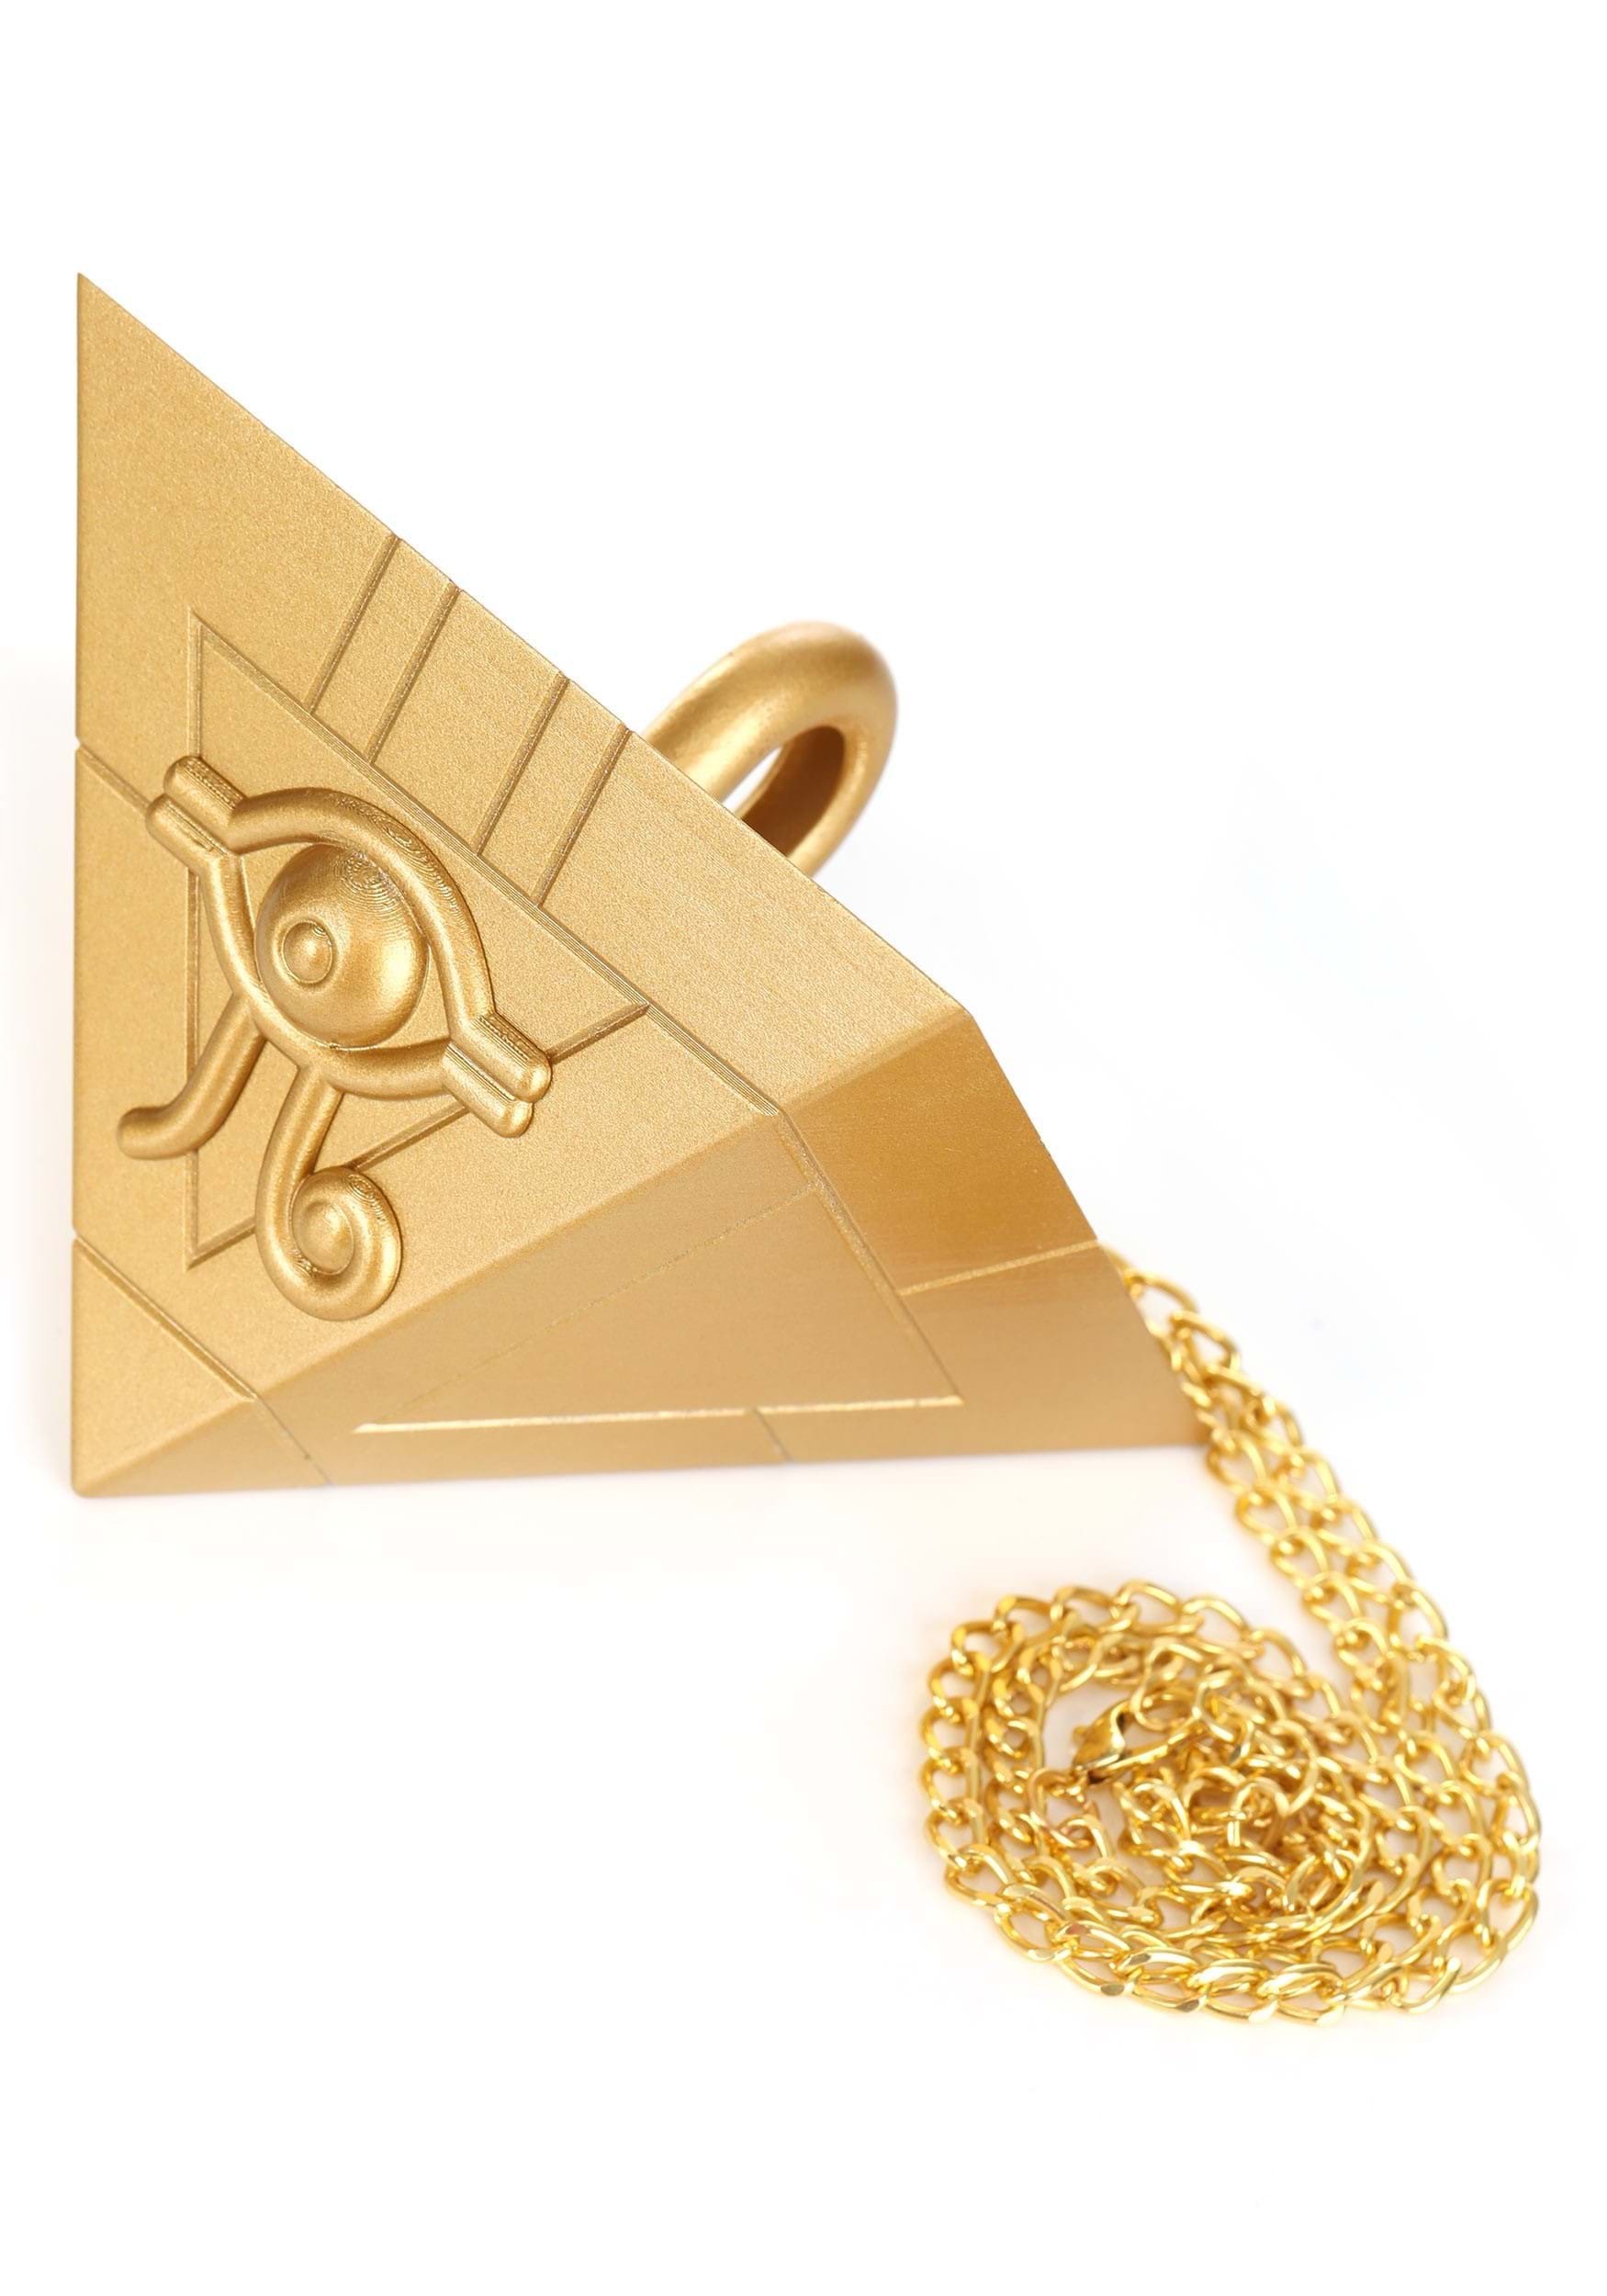 Yu-Gi-Oh Millennium Puzzle Gold Fancy Dress Costume Necklace Accessory